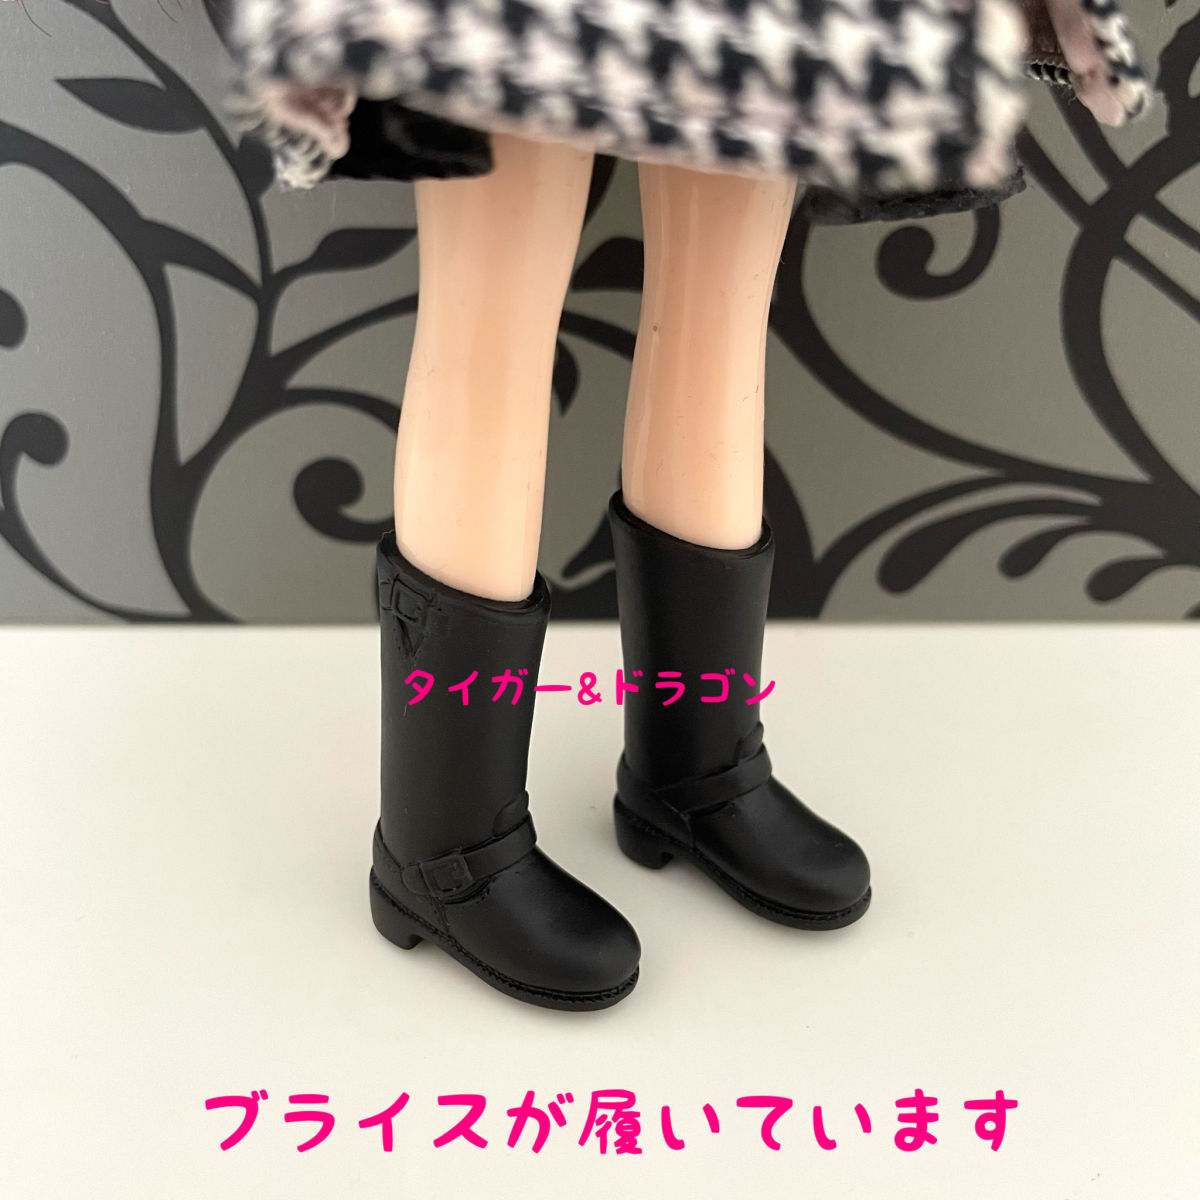  Licca-chan Blythe engineer boots boots shoes boots rain boots doll shoes clothes out Fit put on ...